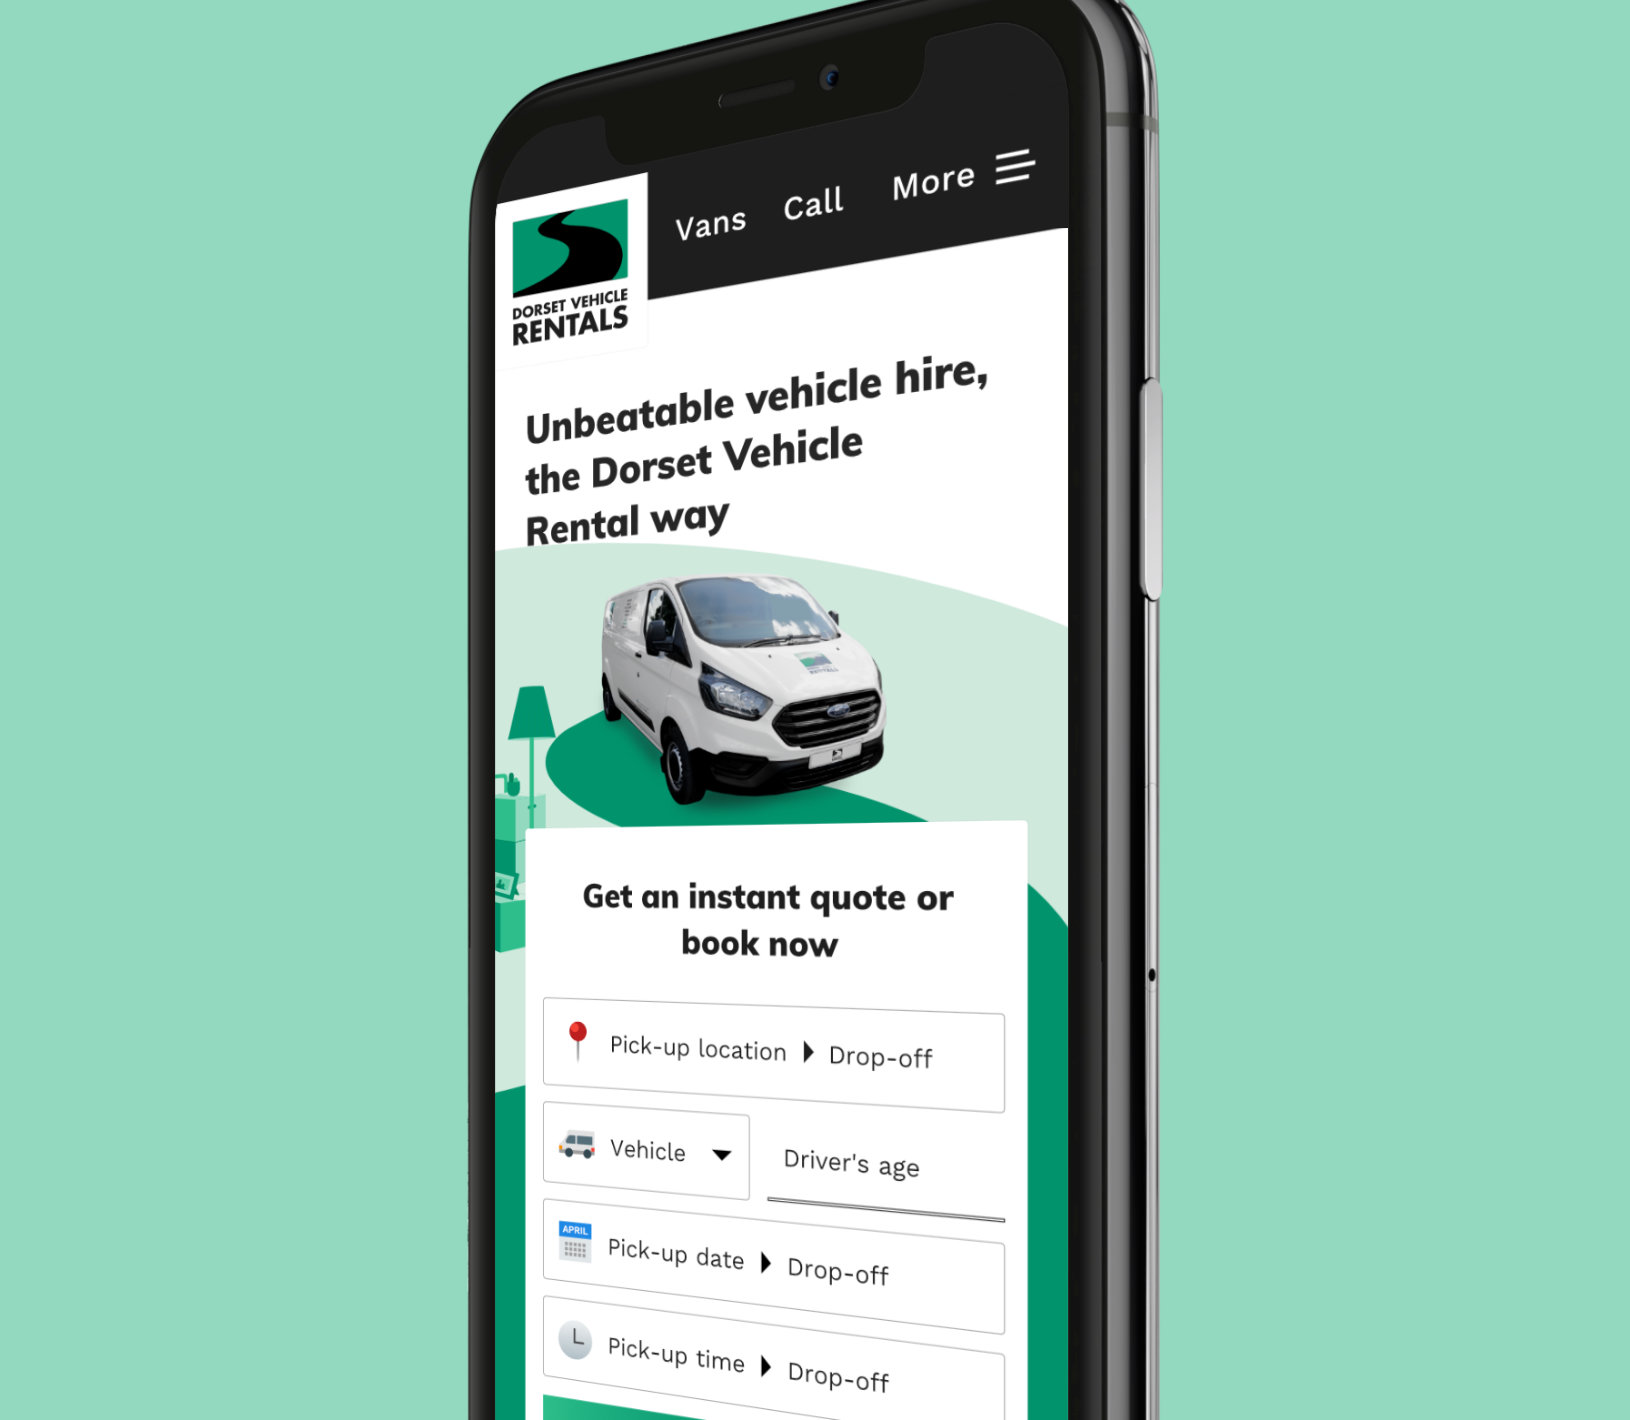 Dorset Vehicle Rentals mobile home page